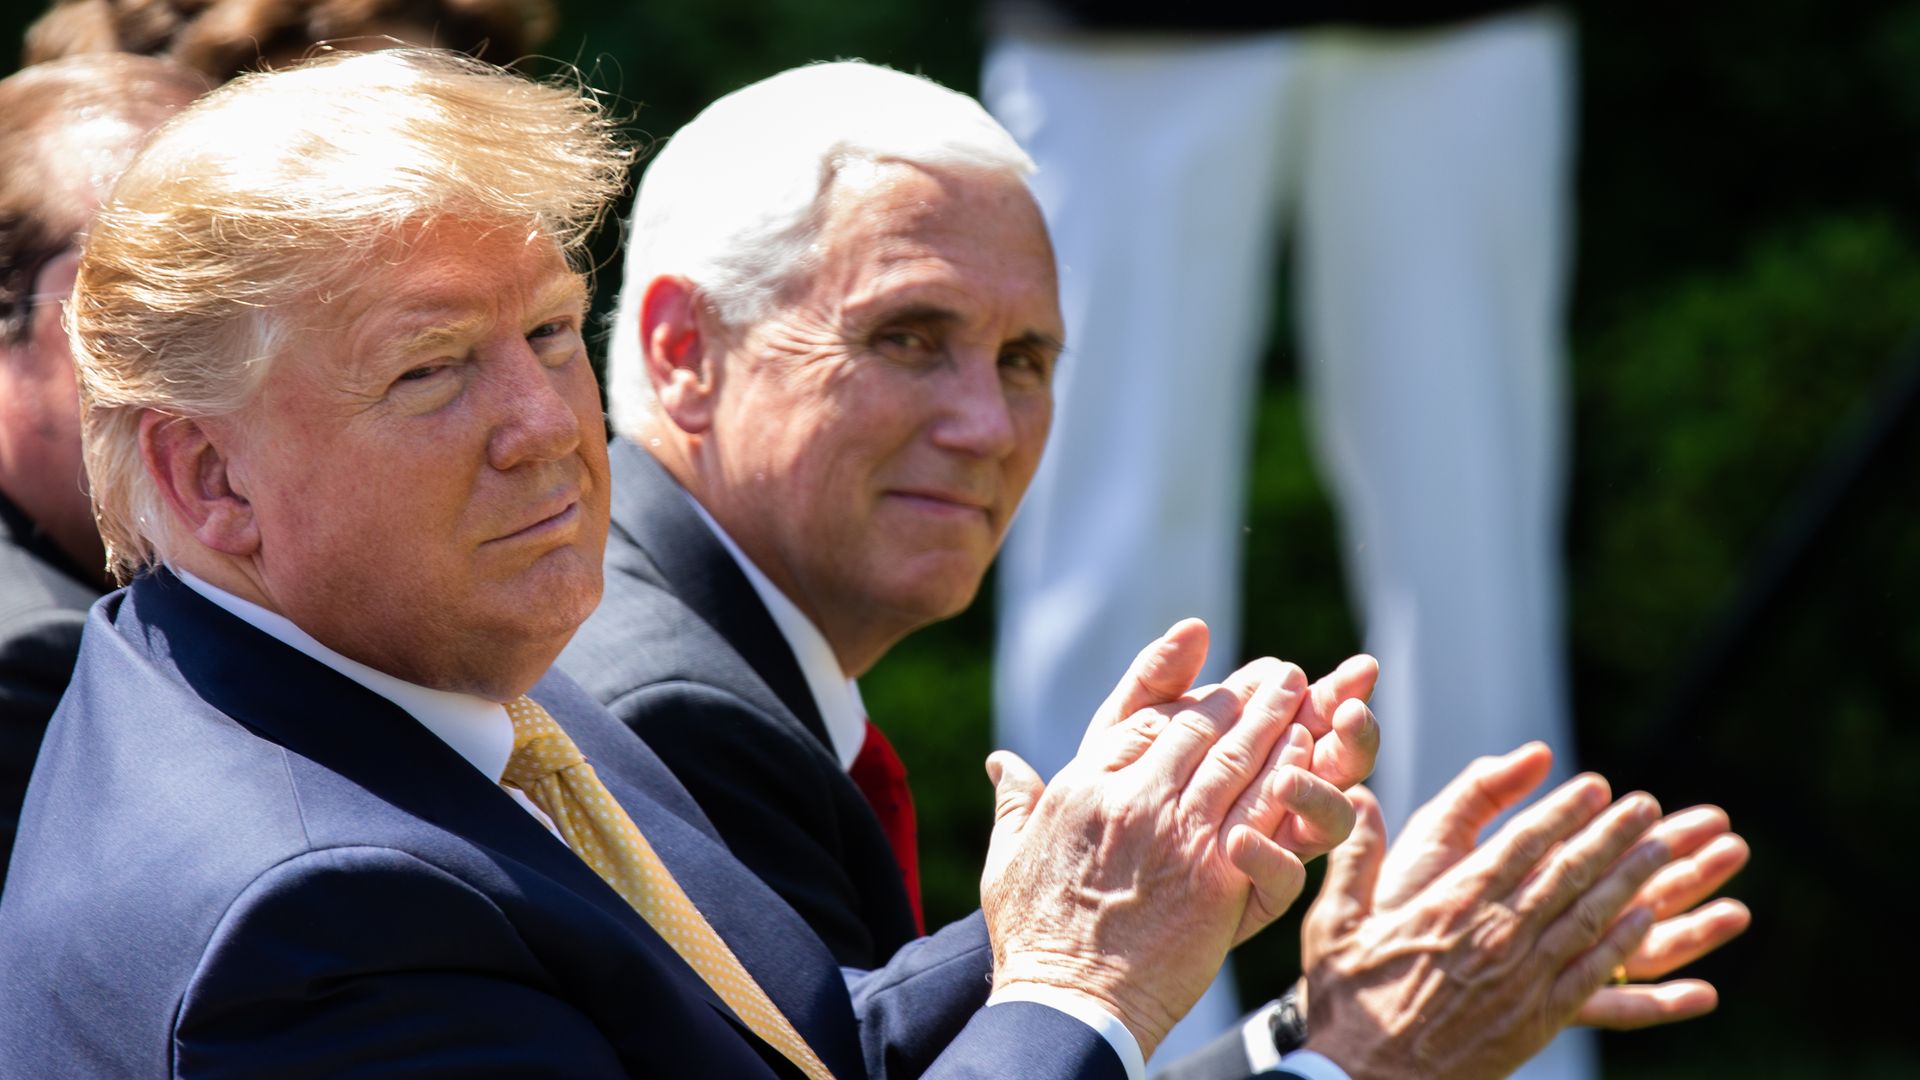 Trump and Pence clapping